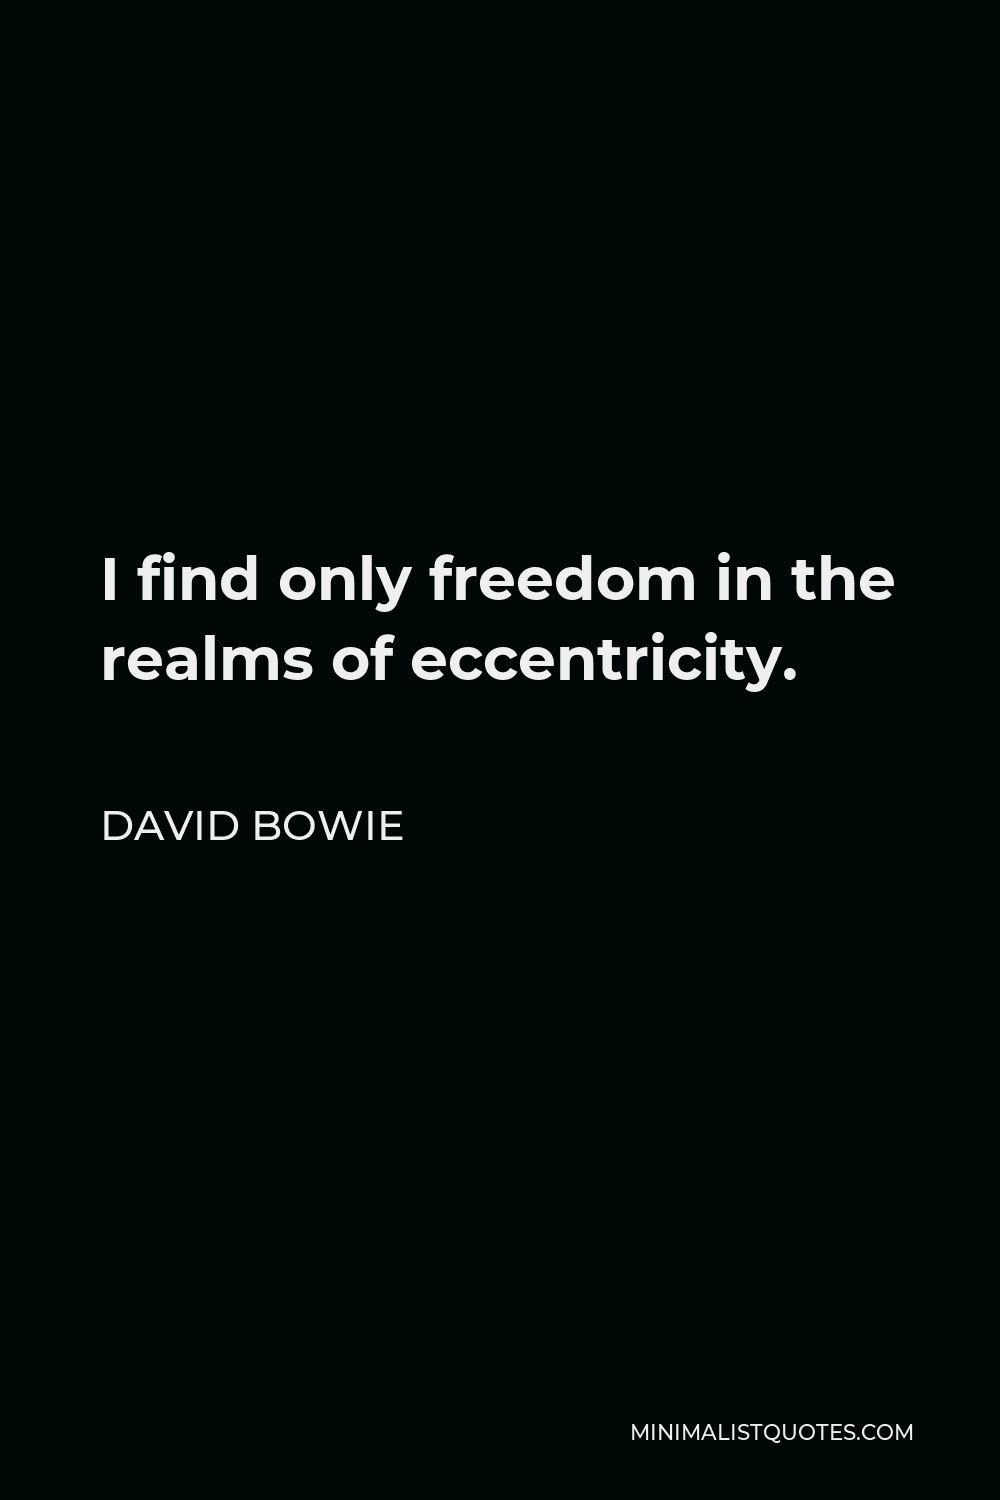 David Bowie Quote - I find only freedom in the realms of eccentricity.